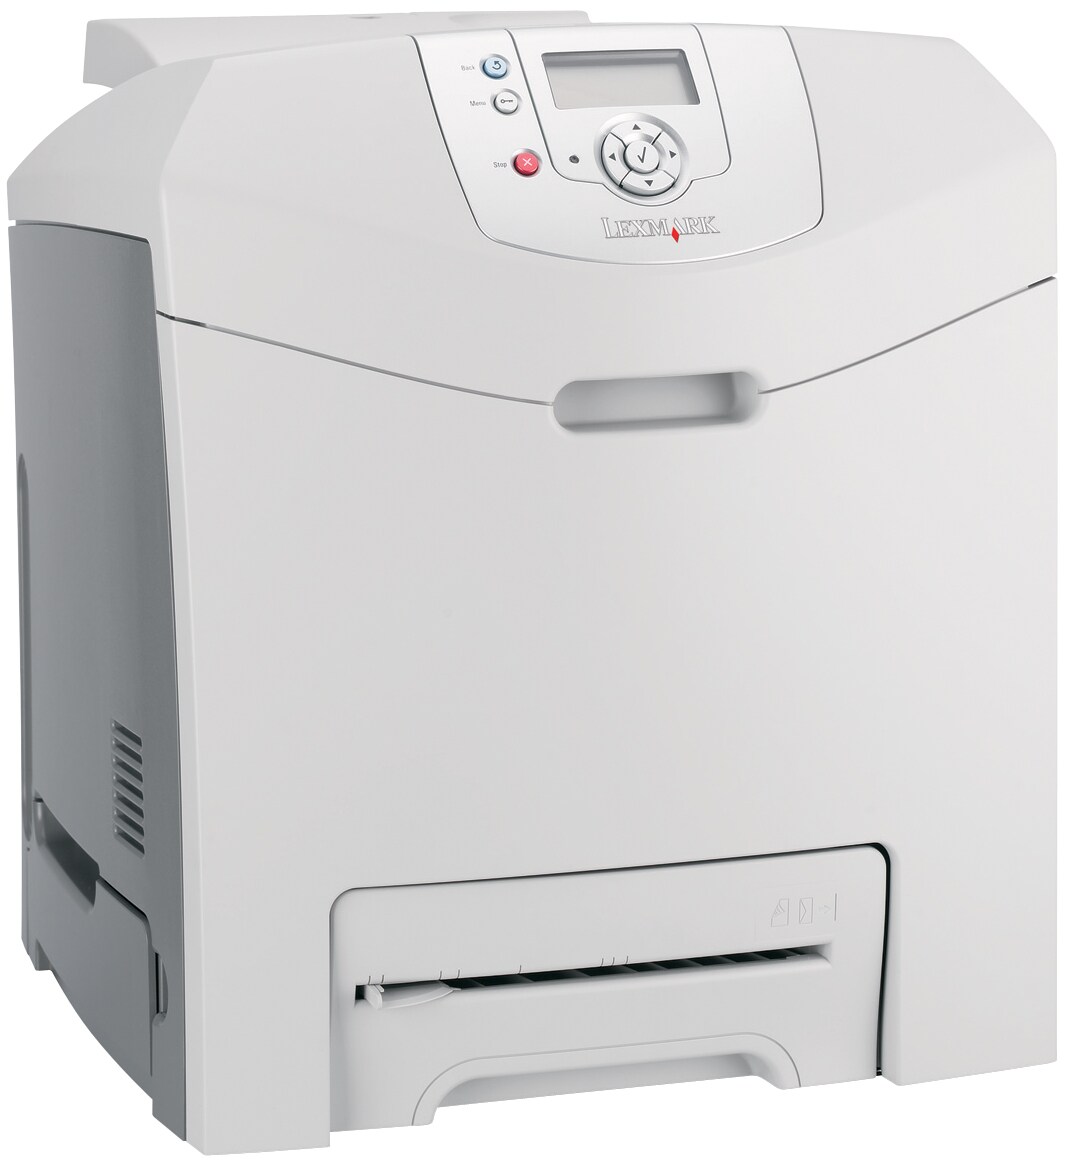 Lexmark C532n (CDW Exclusive Price! While supplies last)